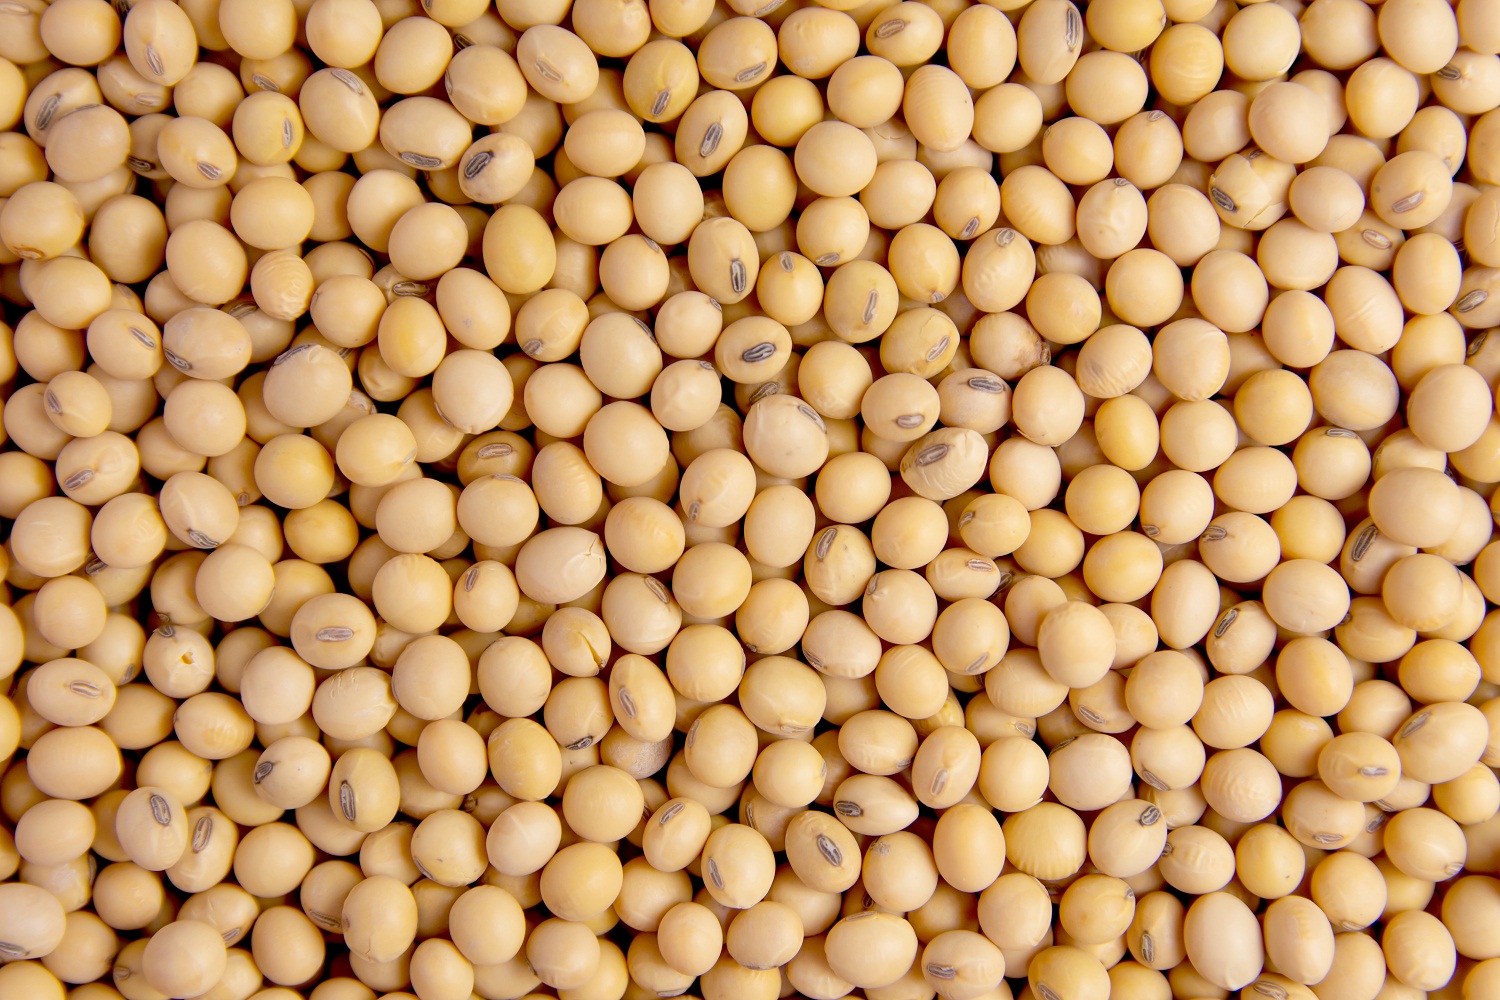 The benefits and uses of soybeans that you may not be aware of